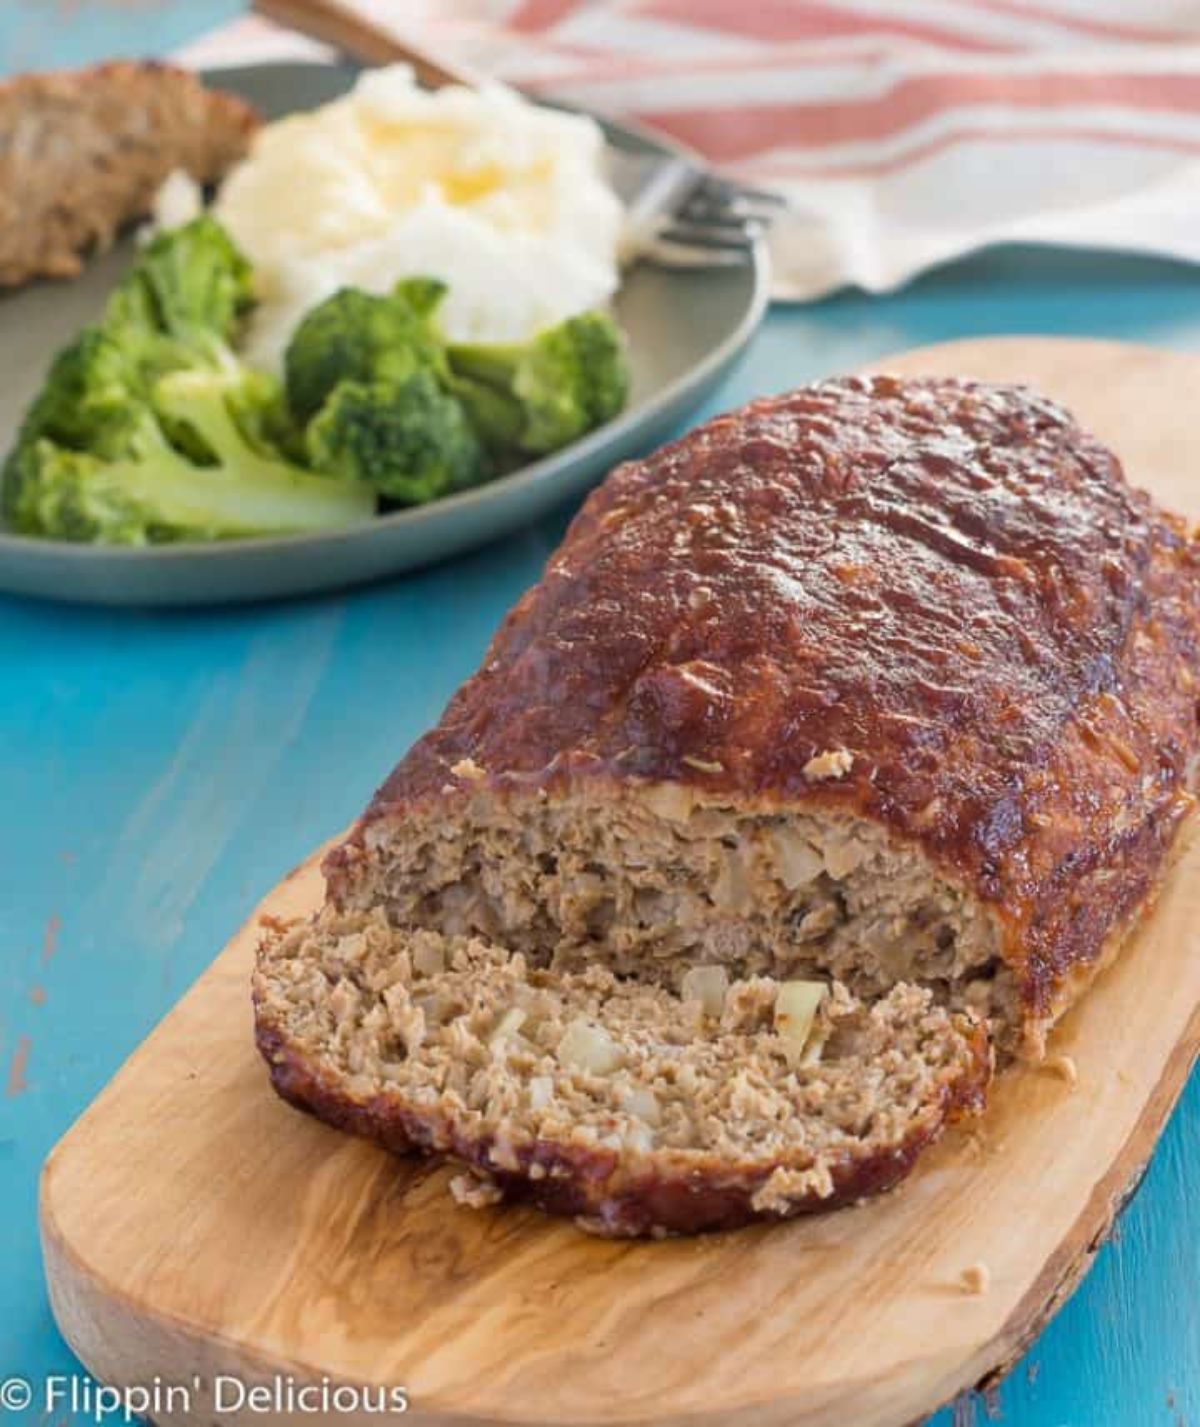 Delicious Gluten-Free Turkey Meatloaf on a wooden cutting board.